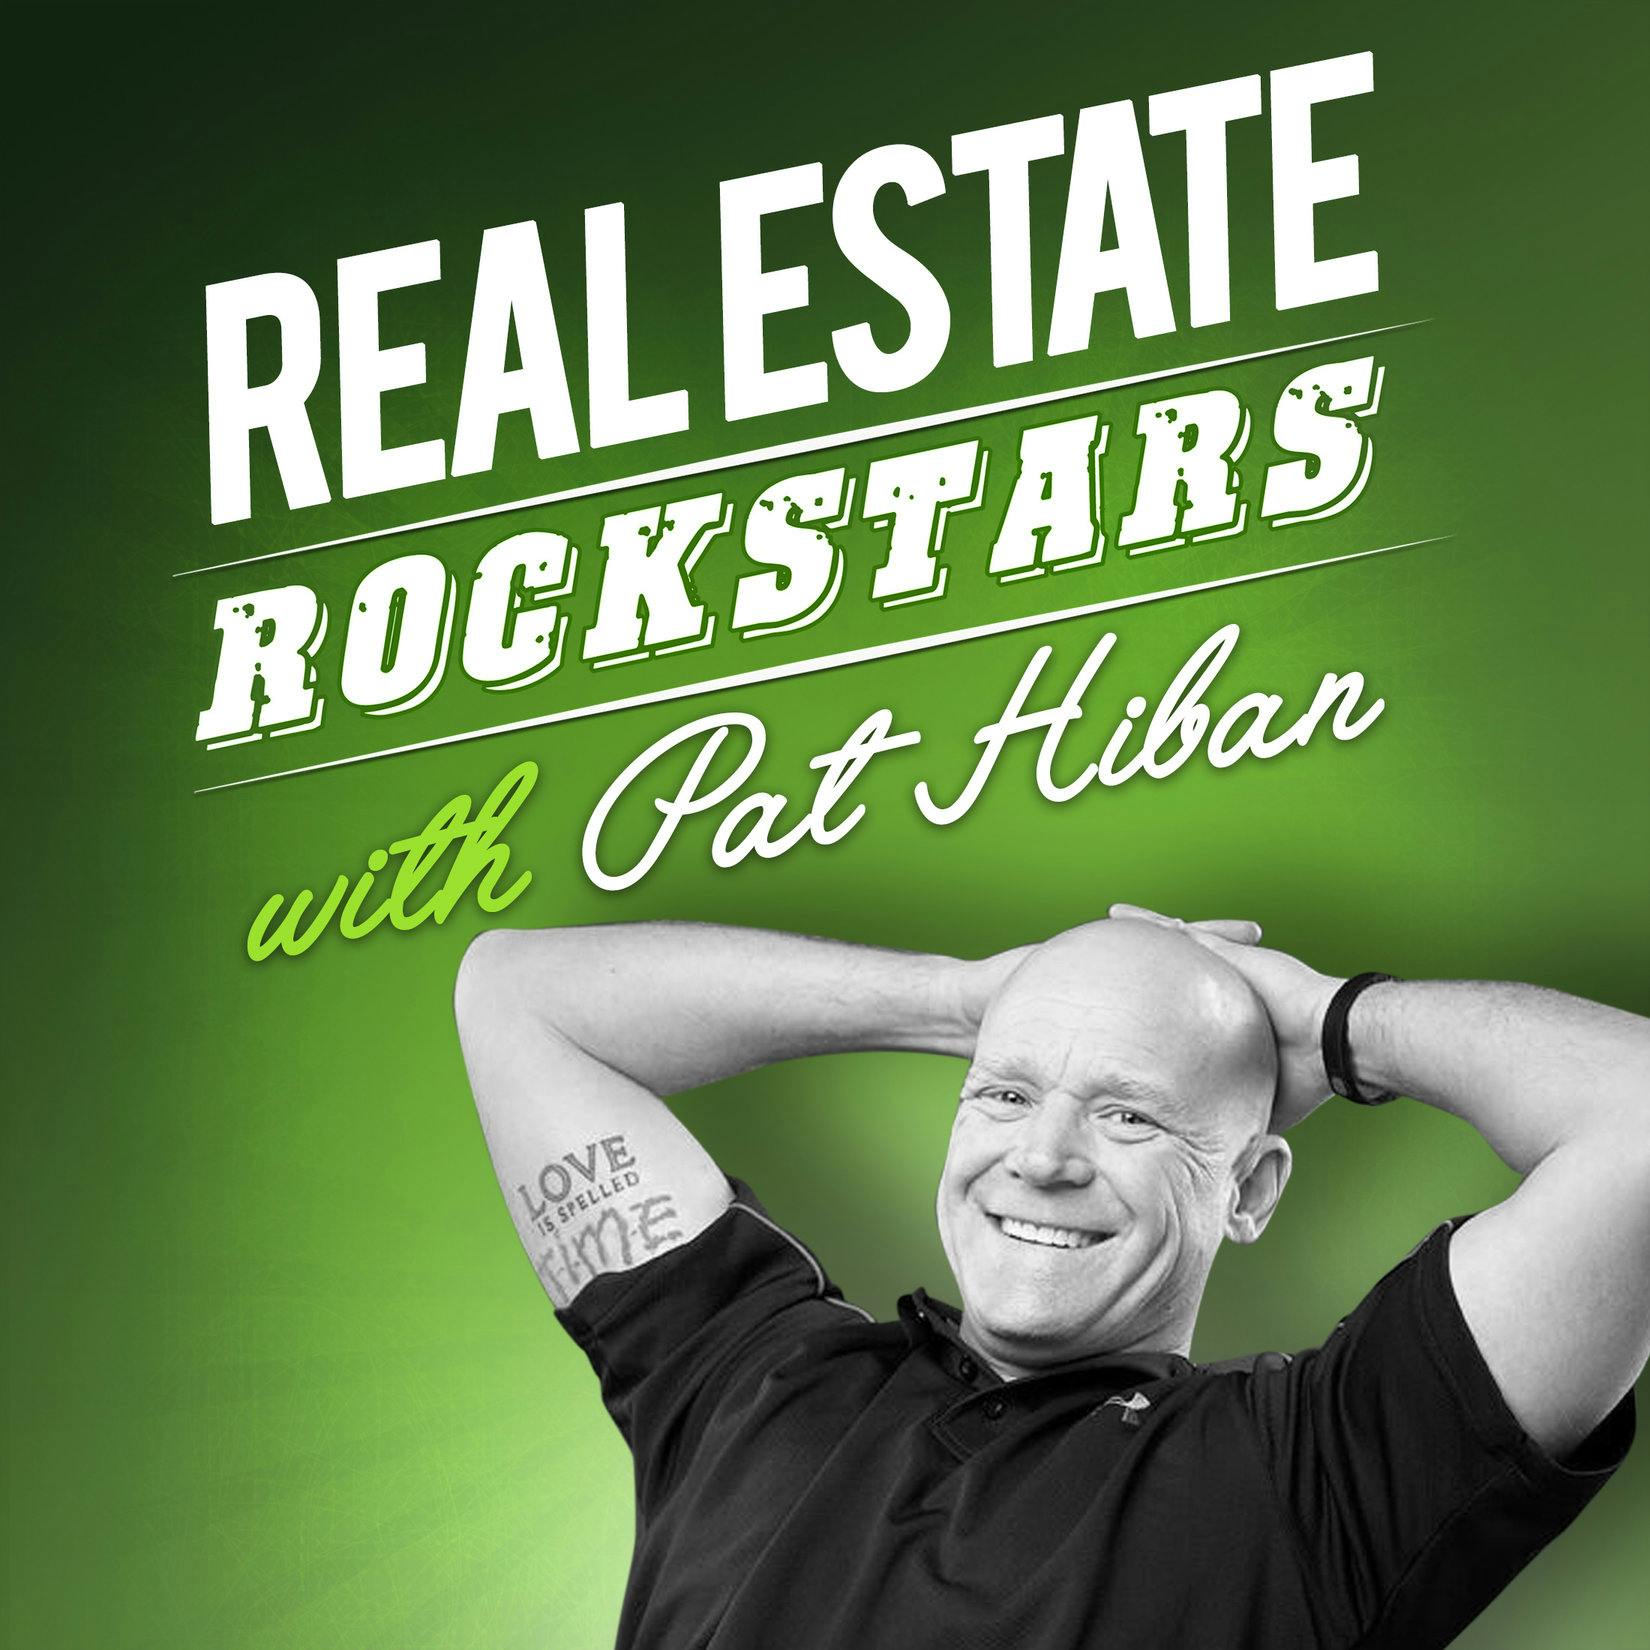 633: The Complete Guide to Converting Online Real Estate Leads with David Tal